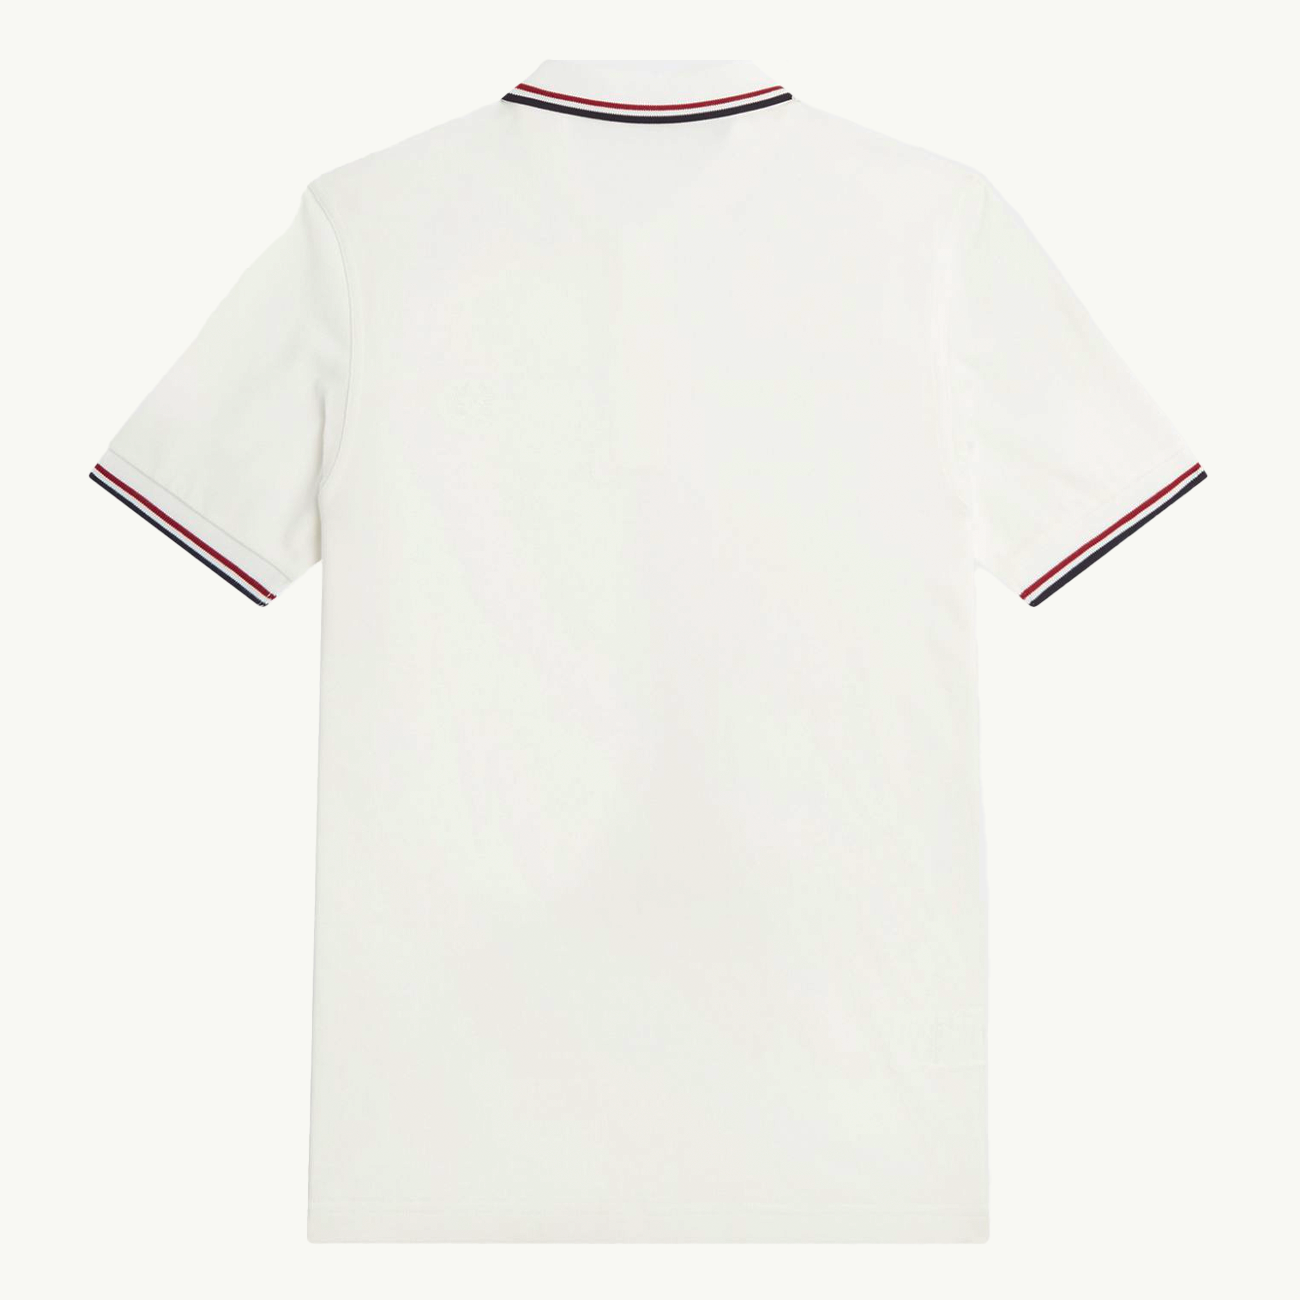 Twin Tipped Shirt - White/Red/Navy